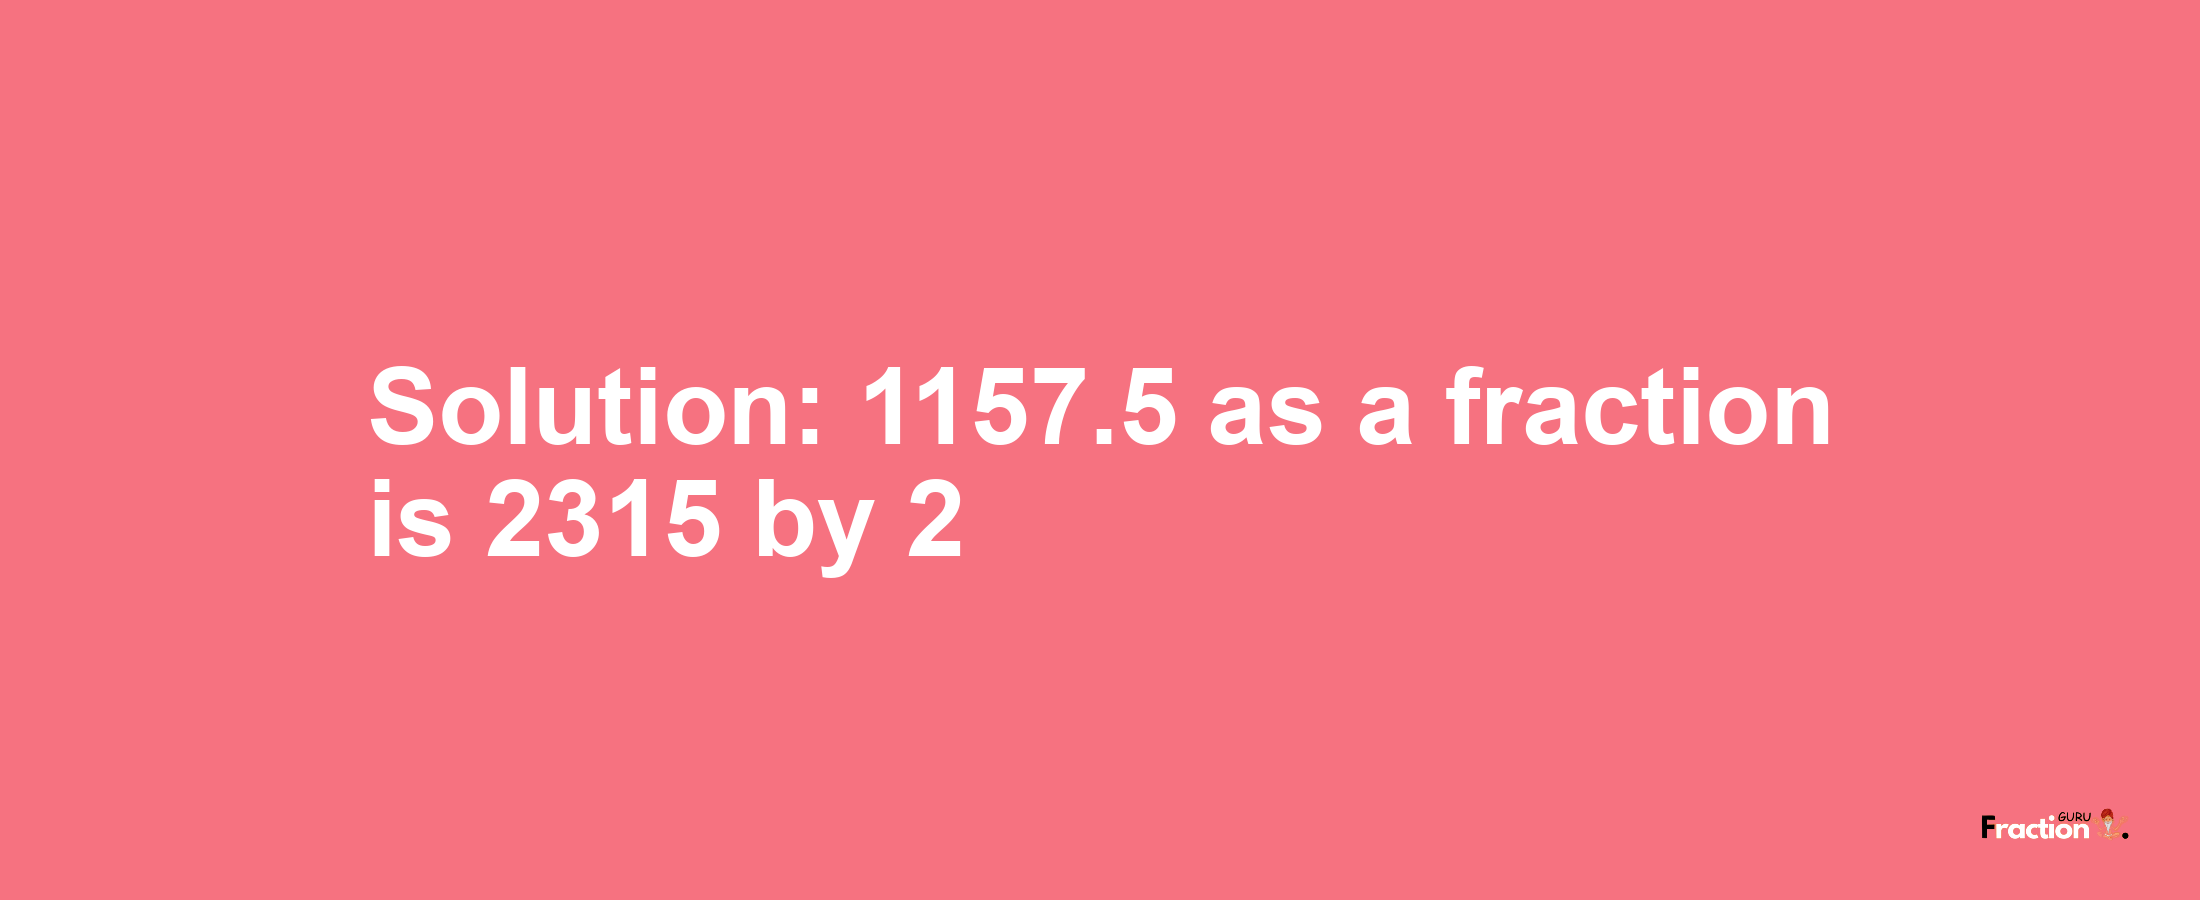 Solution:1157.5 as a fraction is 2315/2